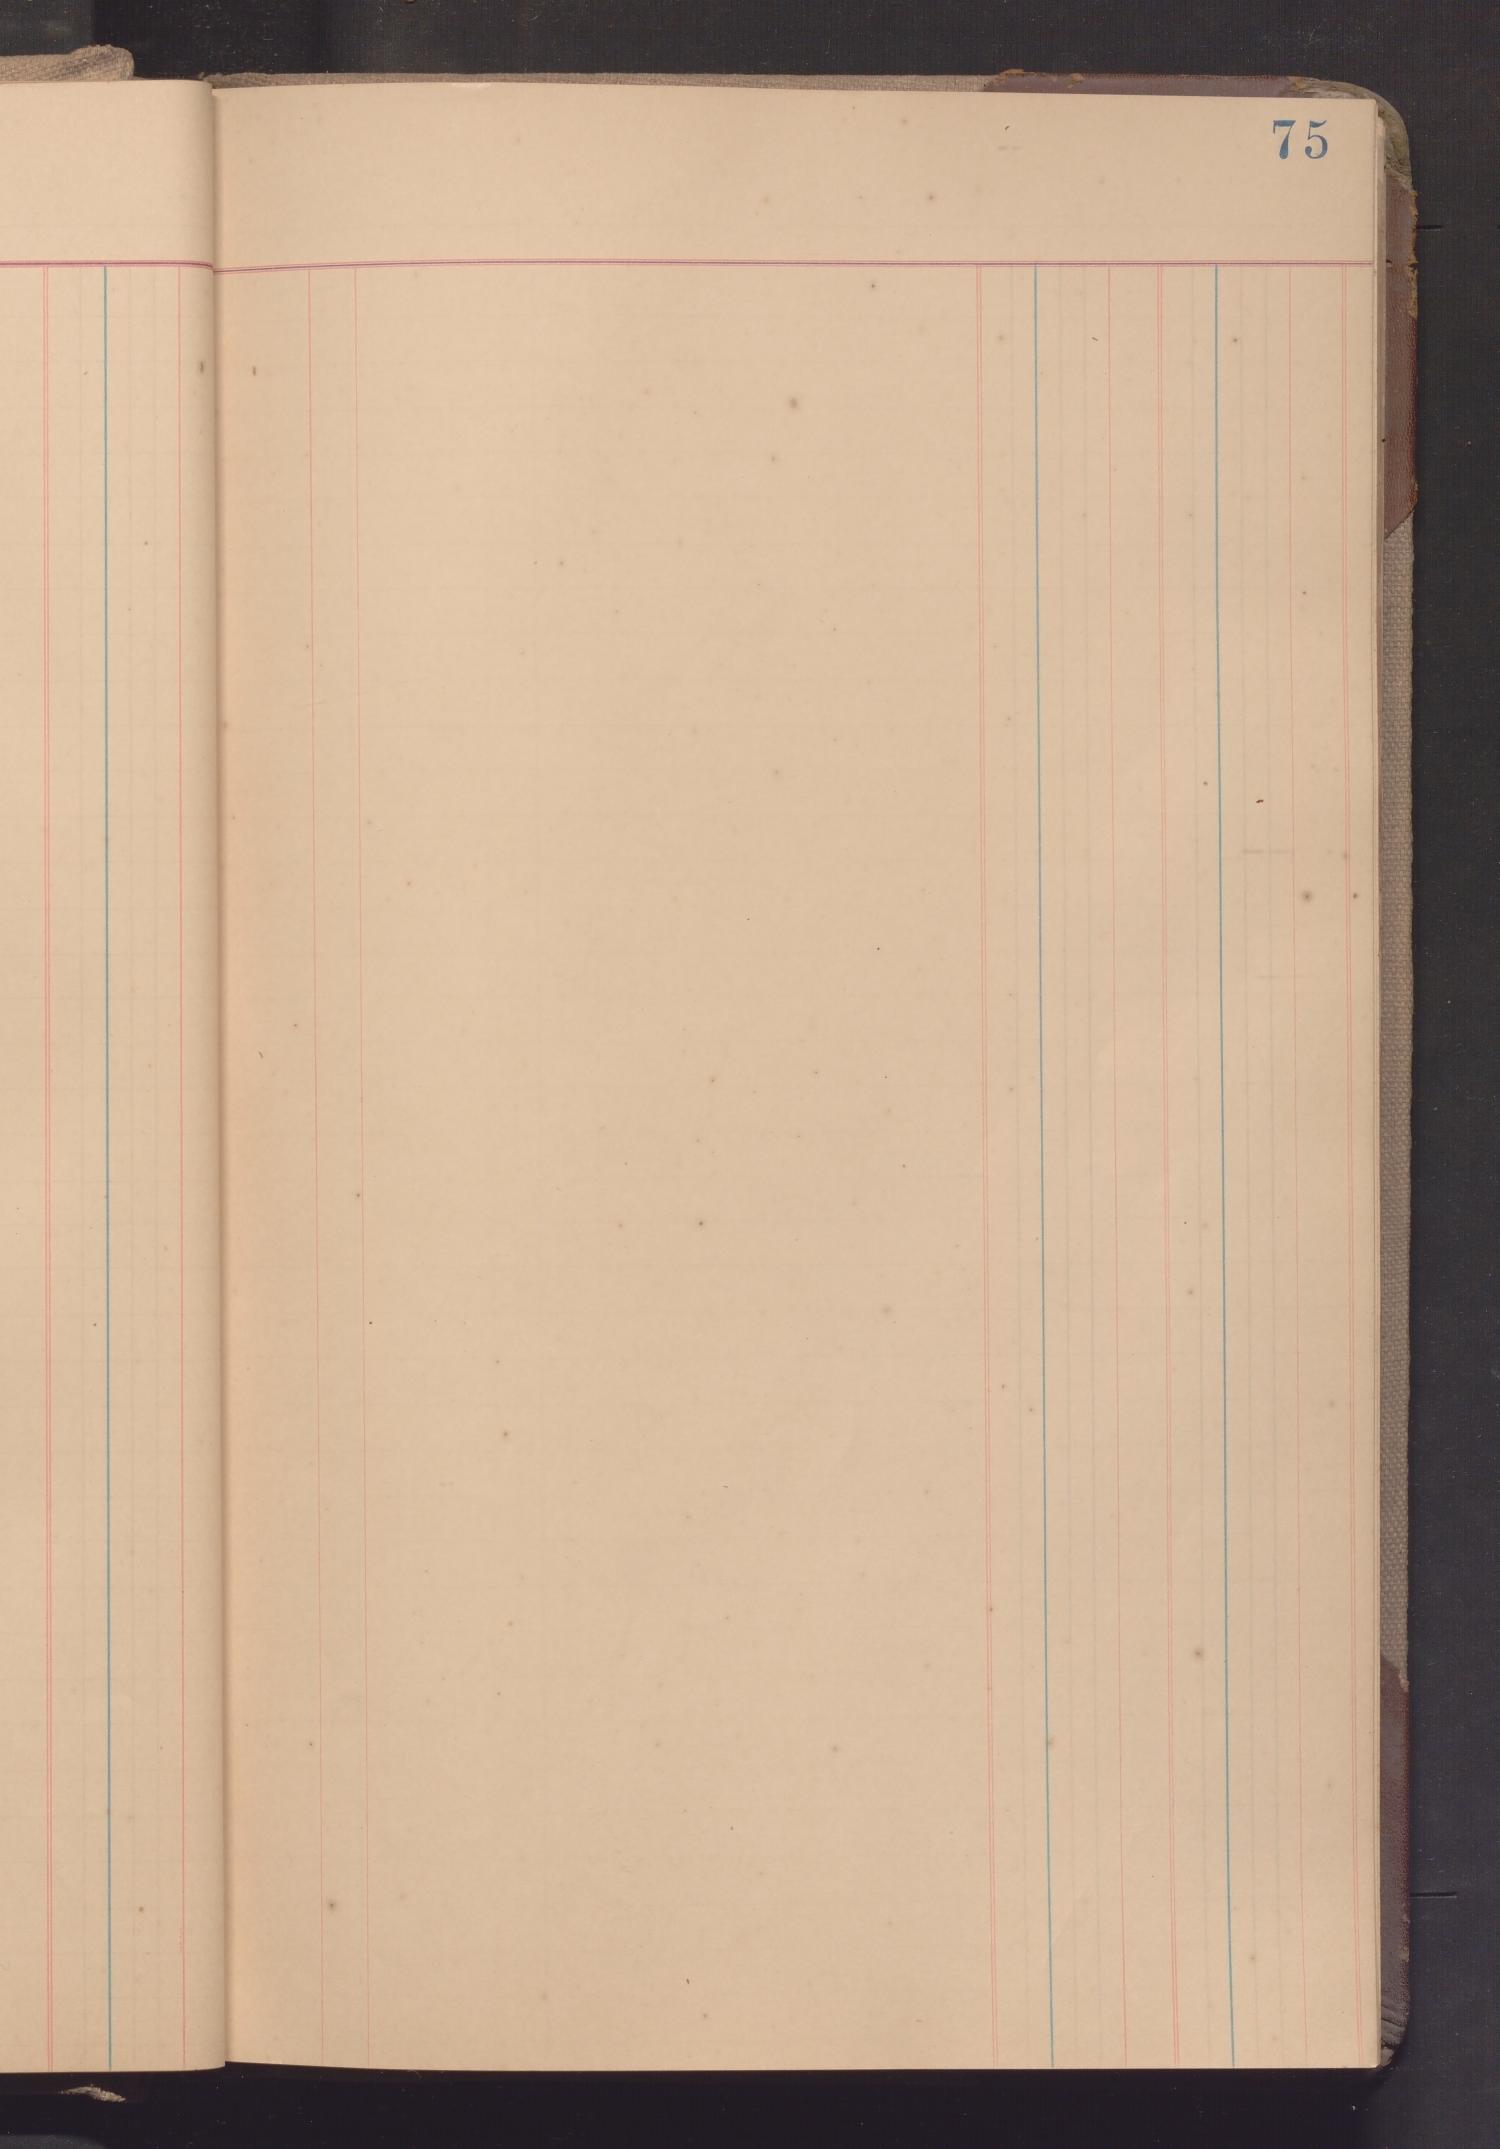 [O'Connor Brothers General Business Ledger: July 1899 - March 1939]
                                                
                                                    75
                                                